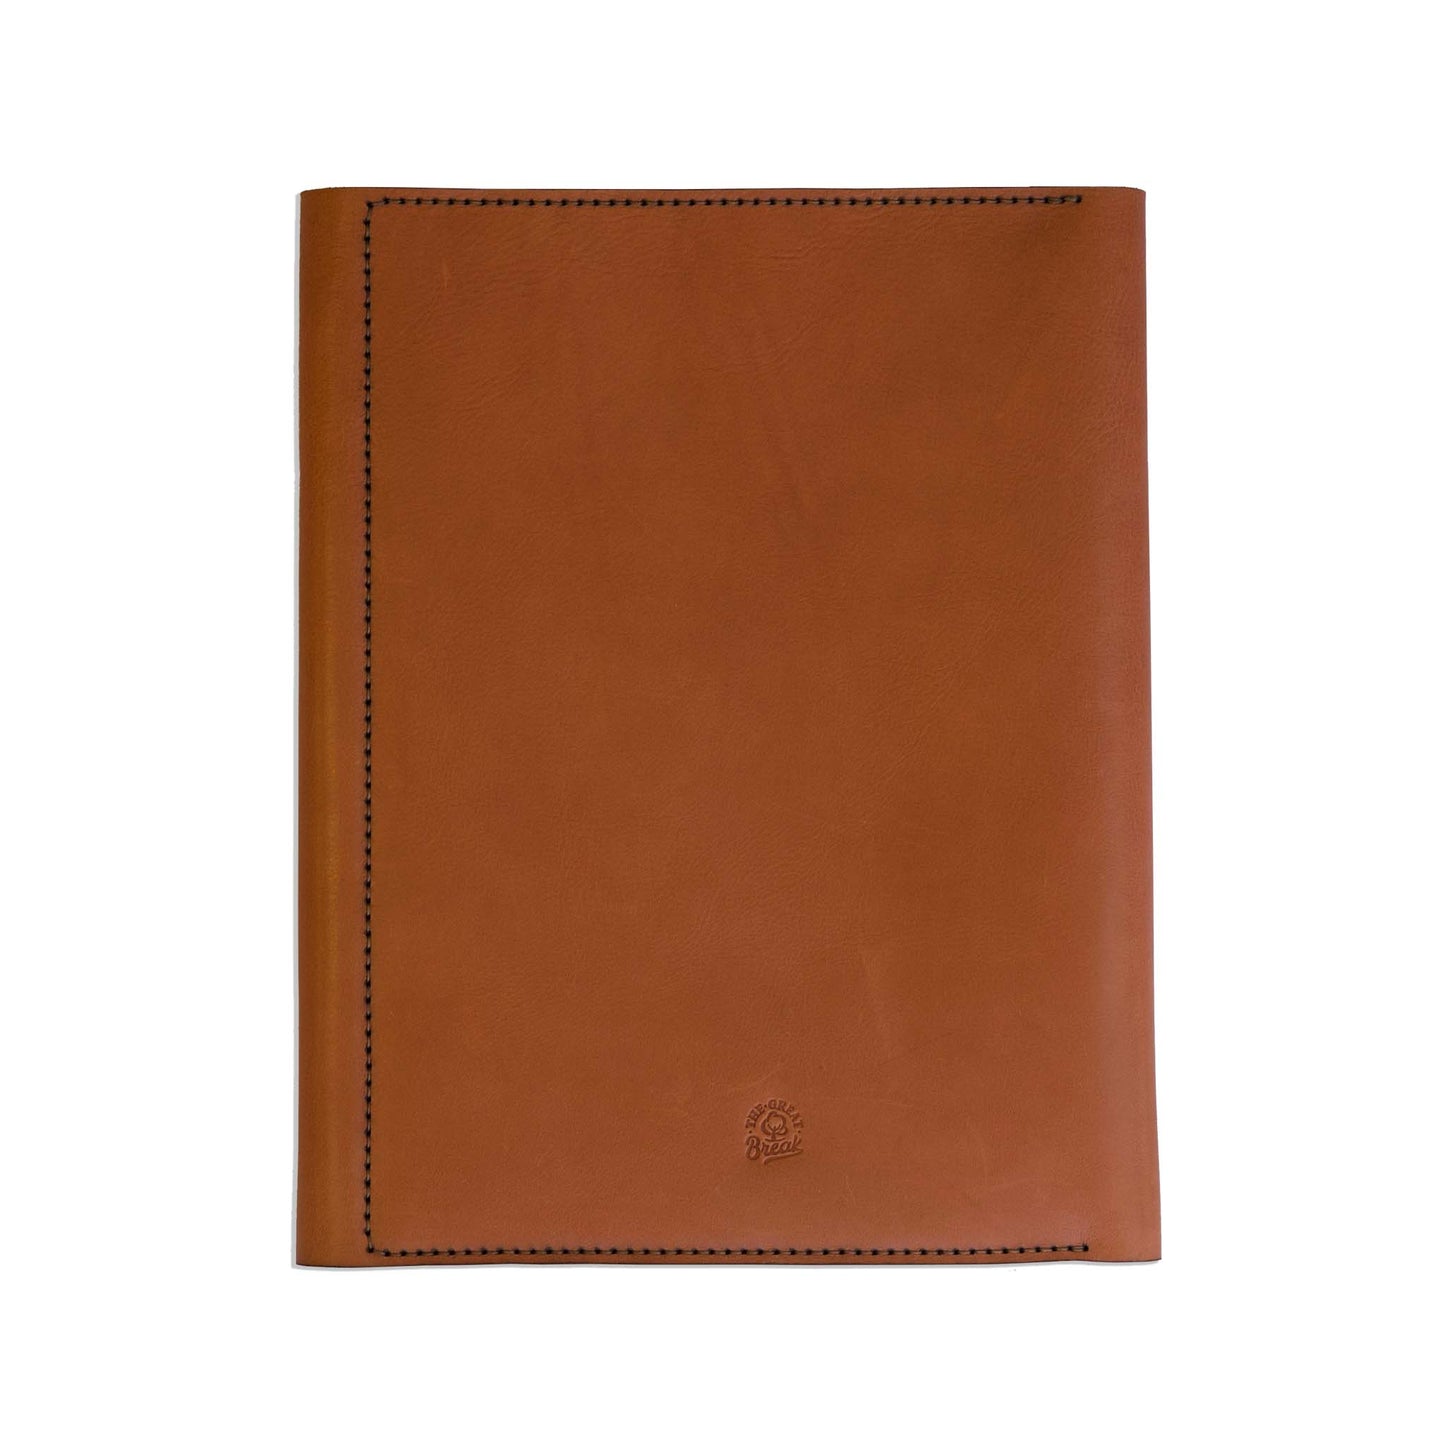 A4 Leather Notebook Cover - Creative Range - The Great Break